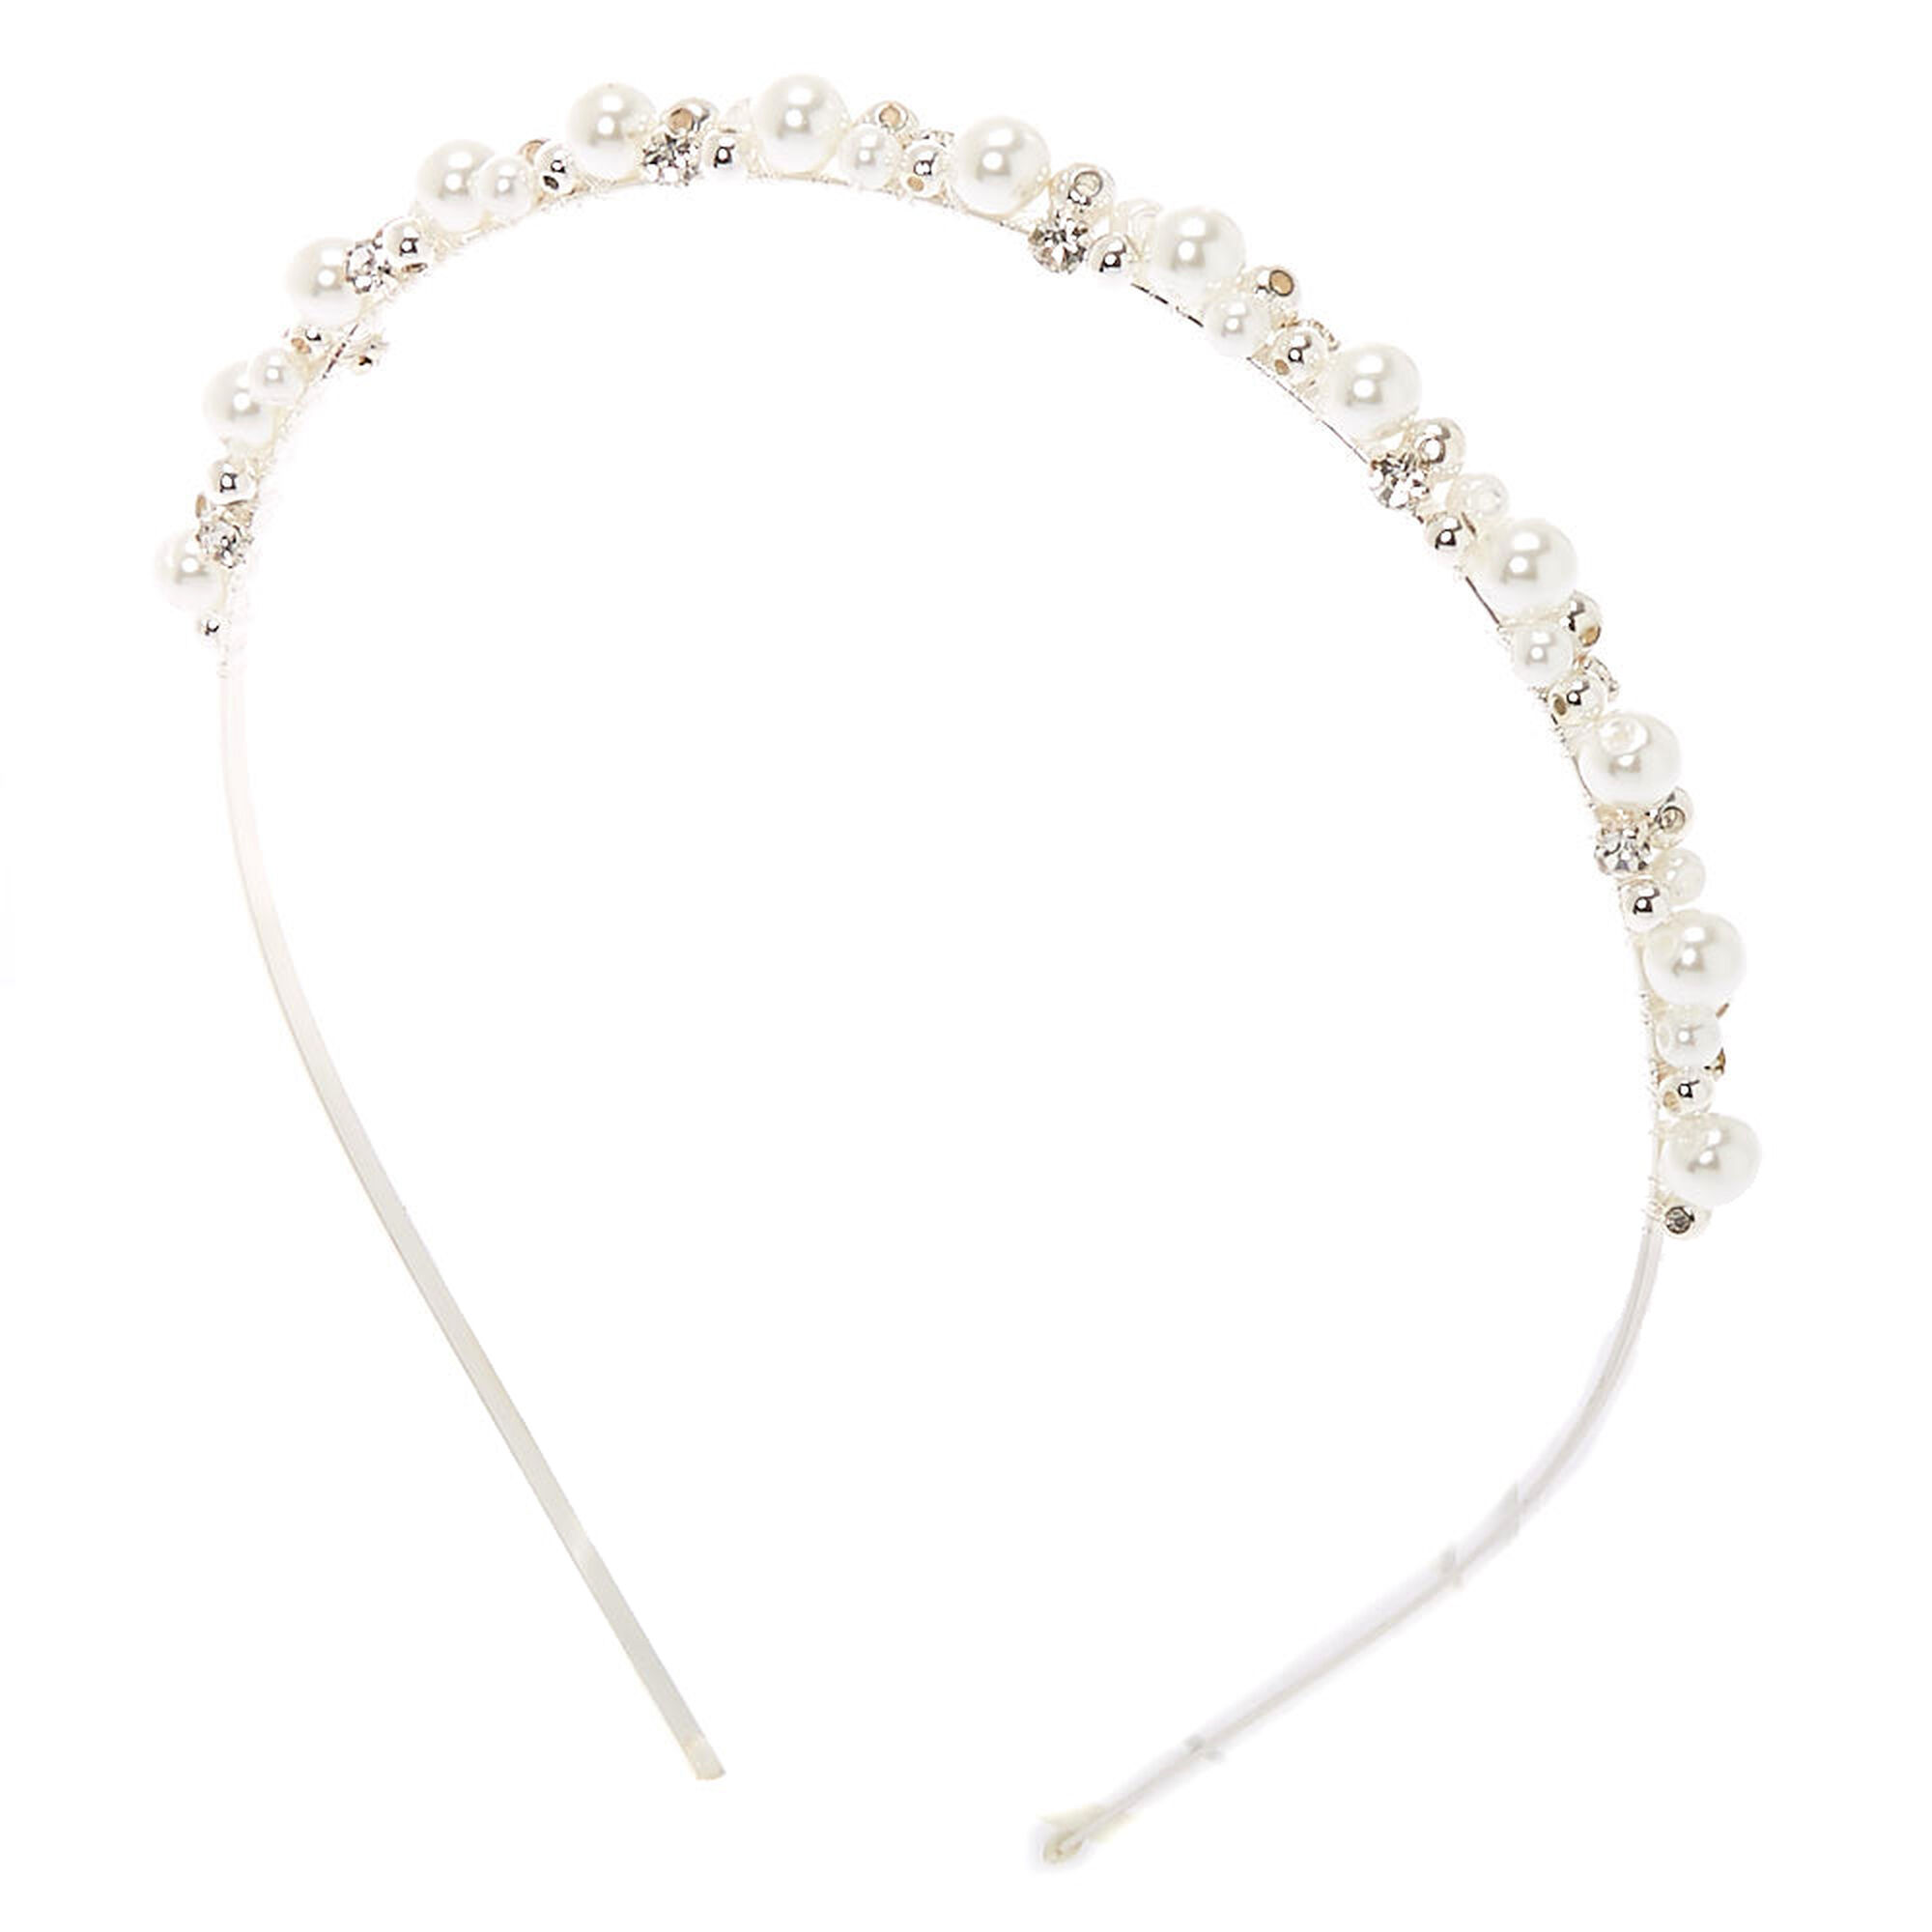 View Claires Pearl Cluster Headband Silver information